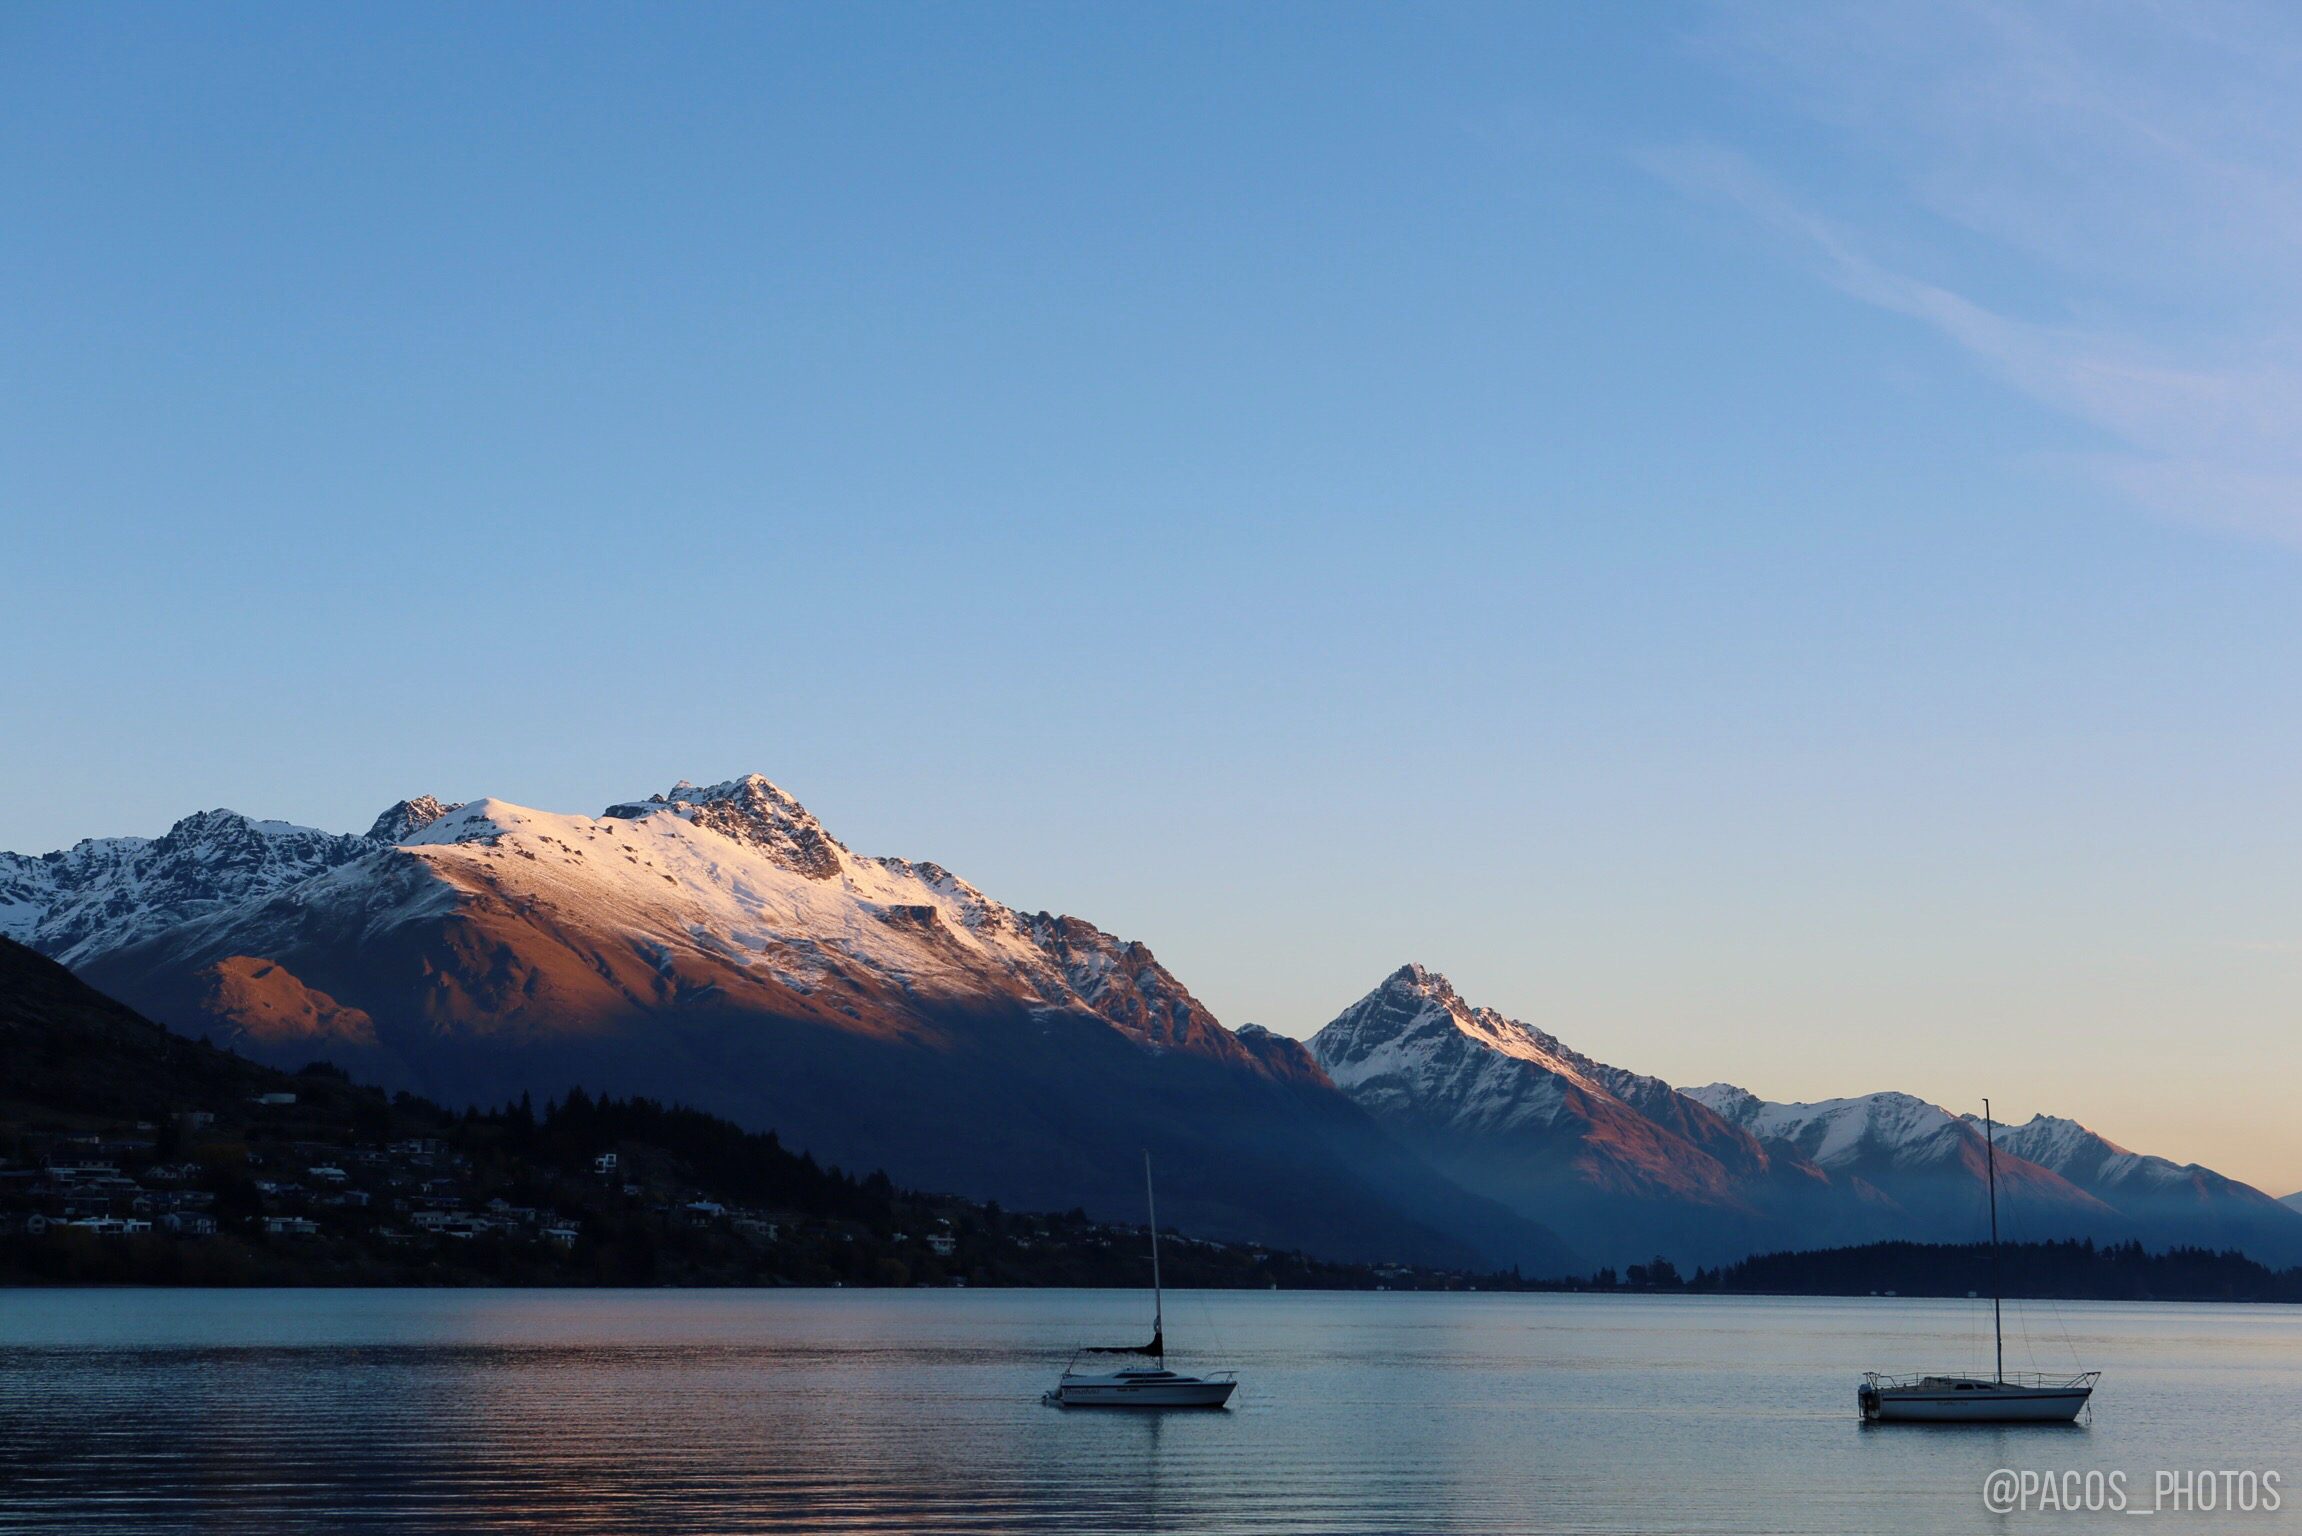 QUEENSTOWN. Sunset at Queenstown, which is situated on the shores of Lake Wakatipu. 